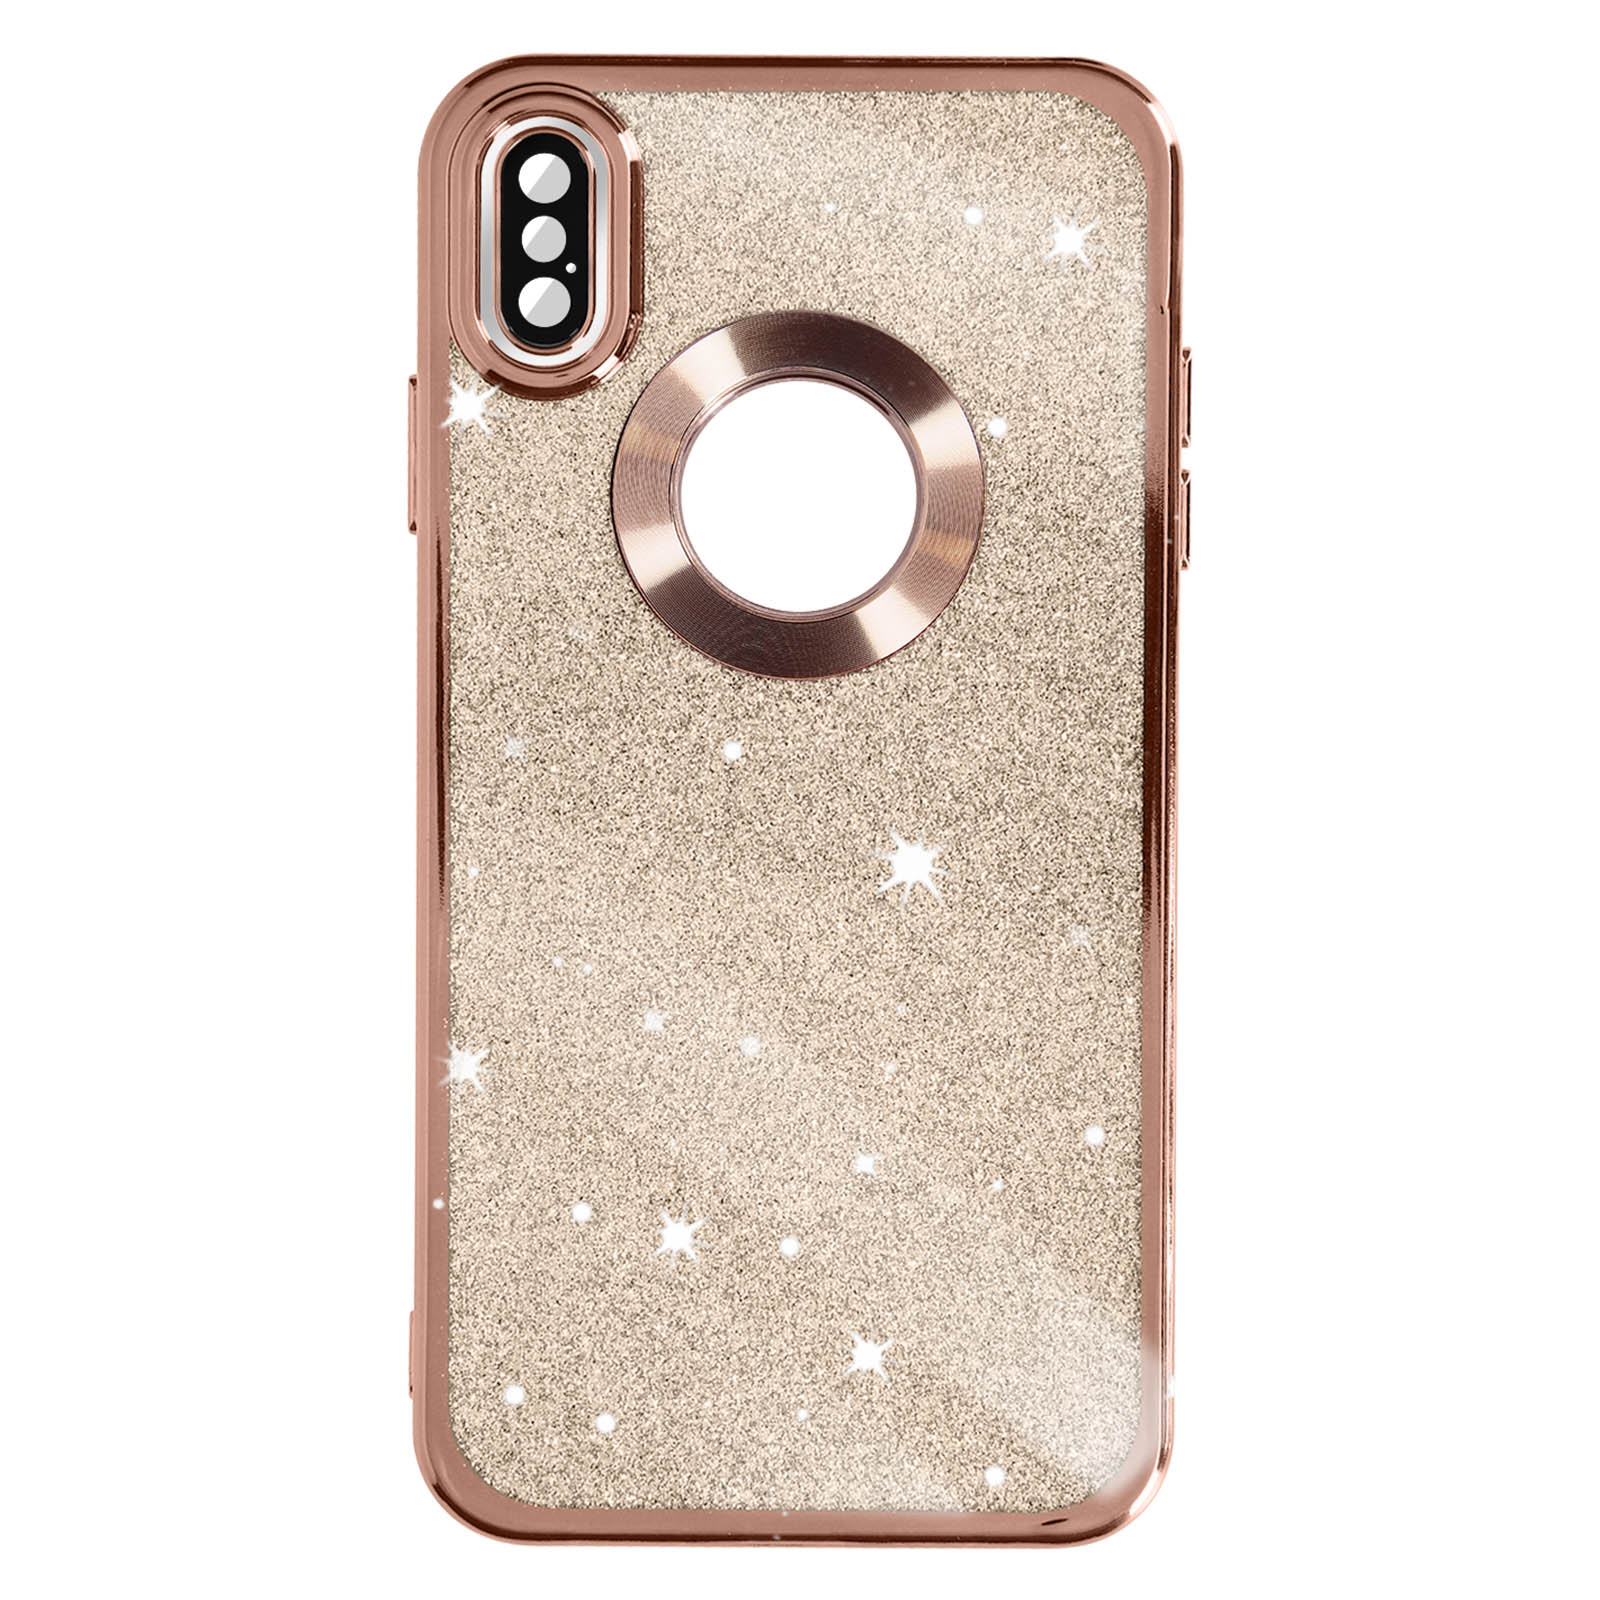 AVIZAR Protecam Spark Max, Rosegold XS Series, Apple, iPhone Backcover